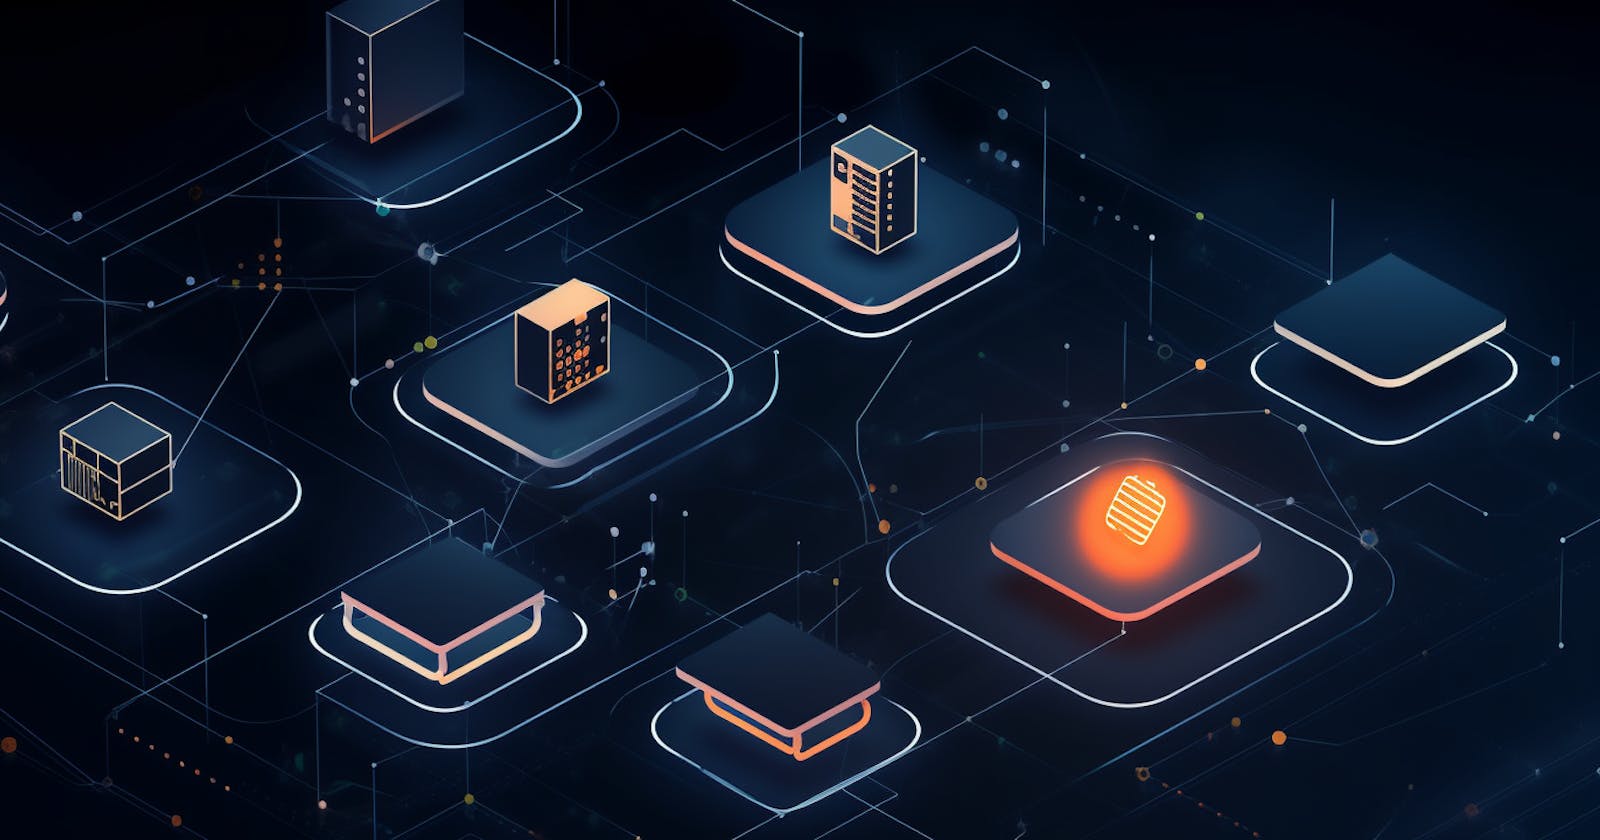 The Ultimate Guide to AWS Services for IoT Applications